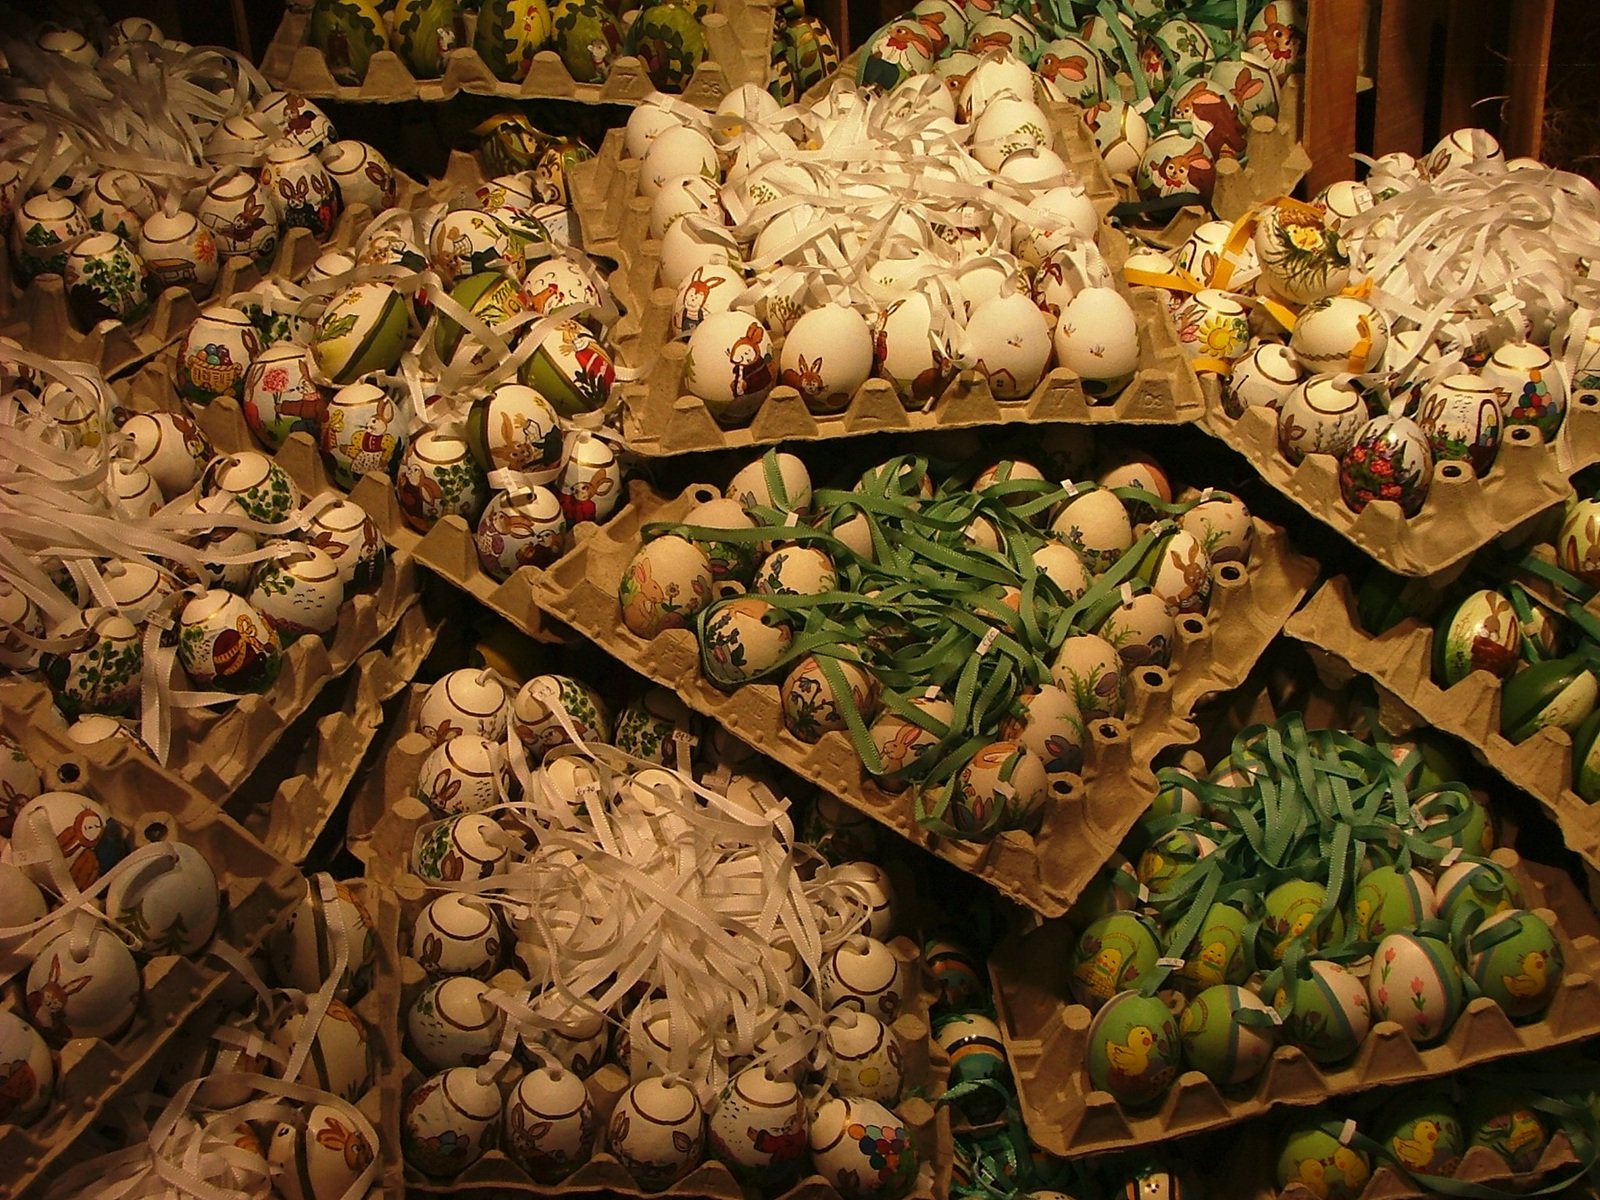 the display of vegetables has many types of bulbs